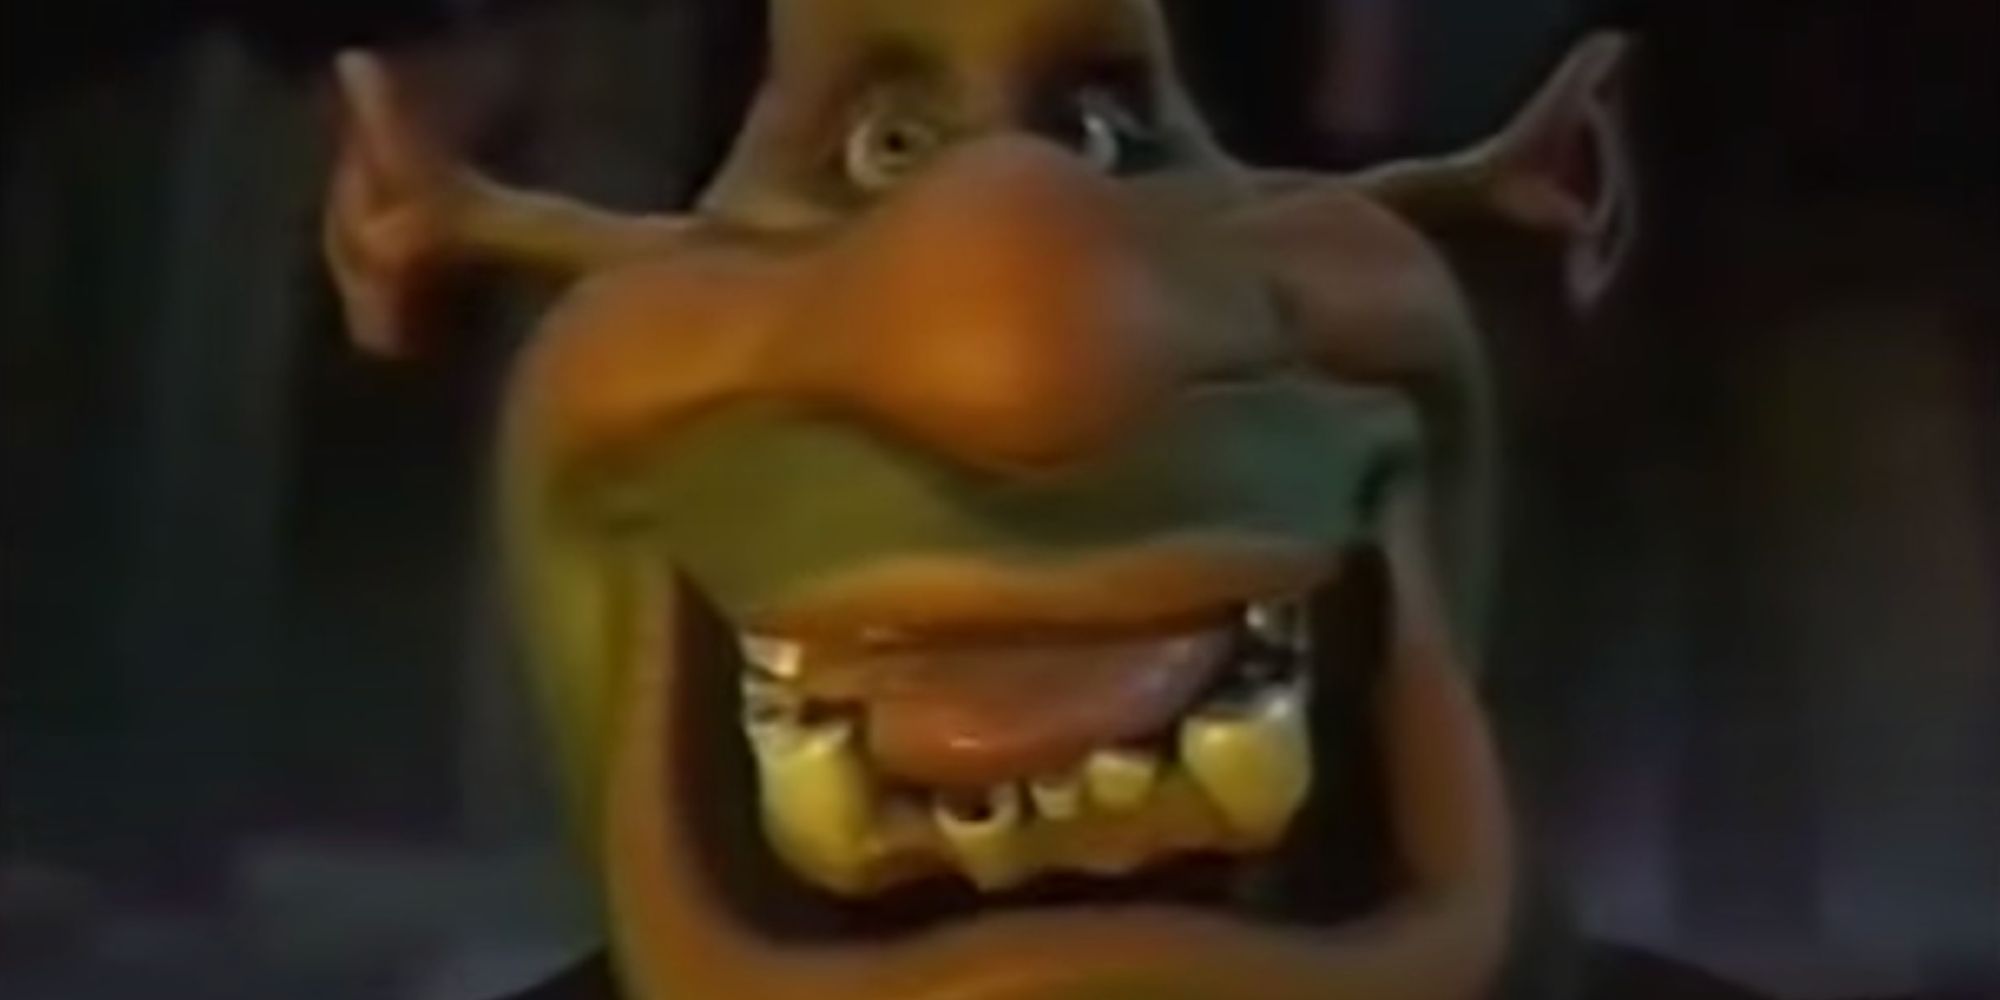 Shrek’s Early Test Animation, Thought Lost For 20+ Years, Has Been Found: Watch Cinema History Here